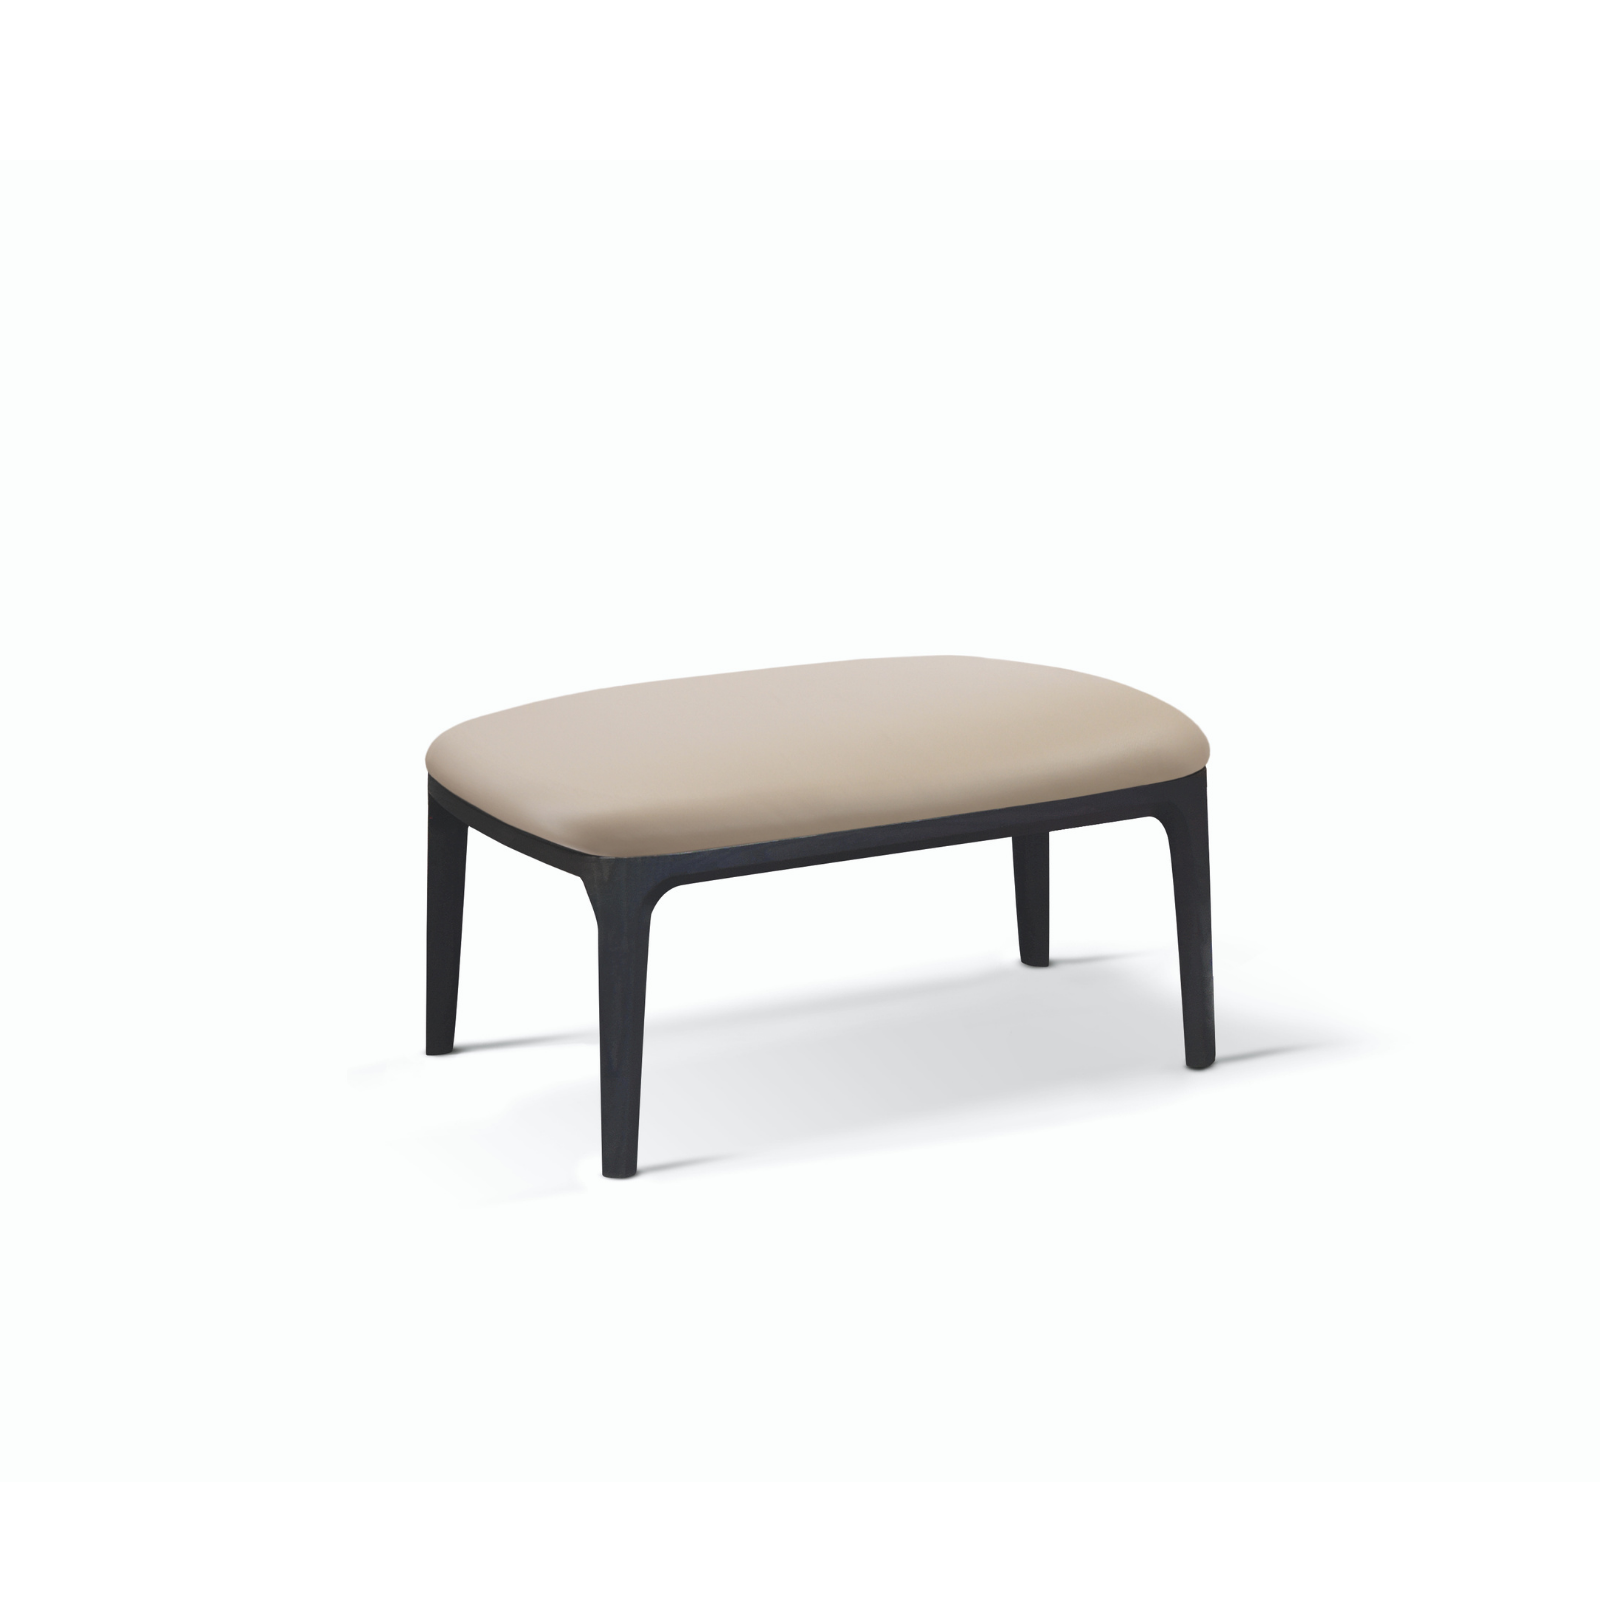 Manda bench to be combined with the full collection of Manda either in a bedroom or in a living area.